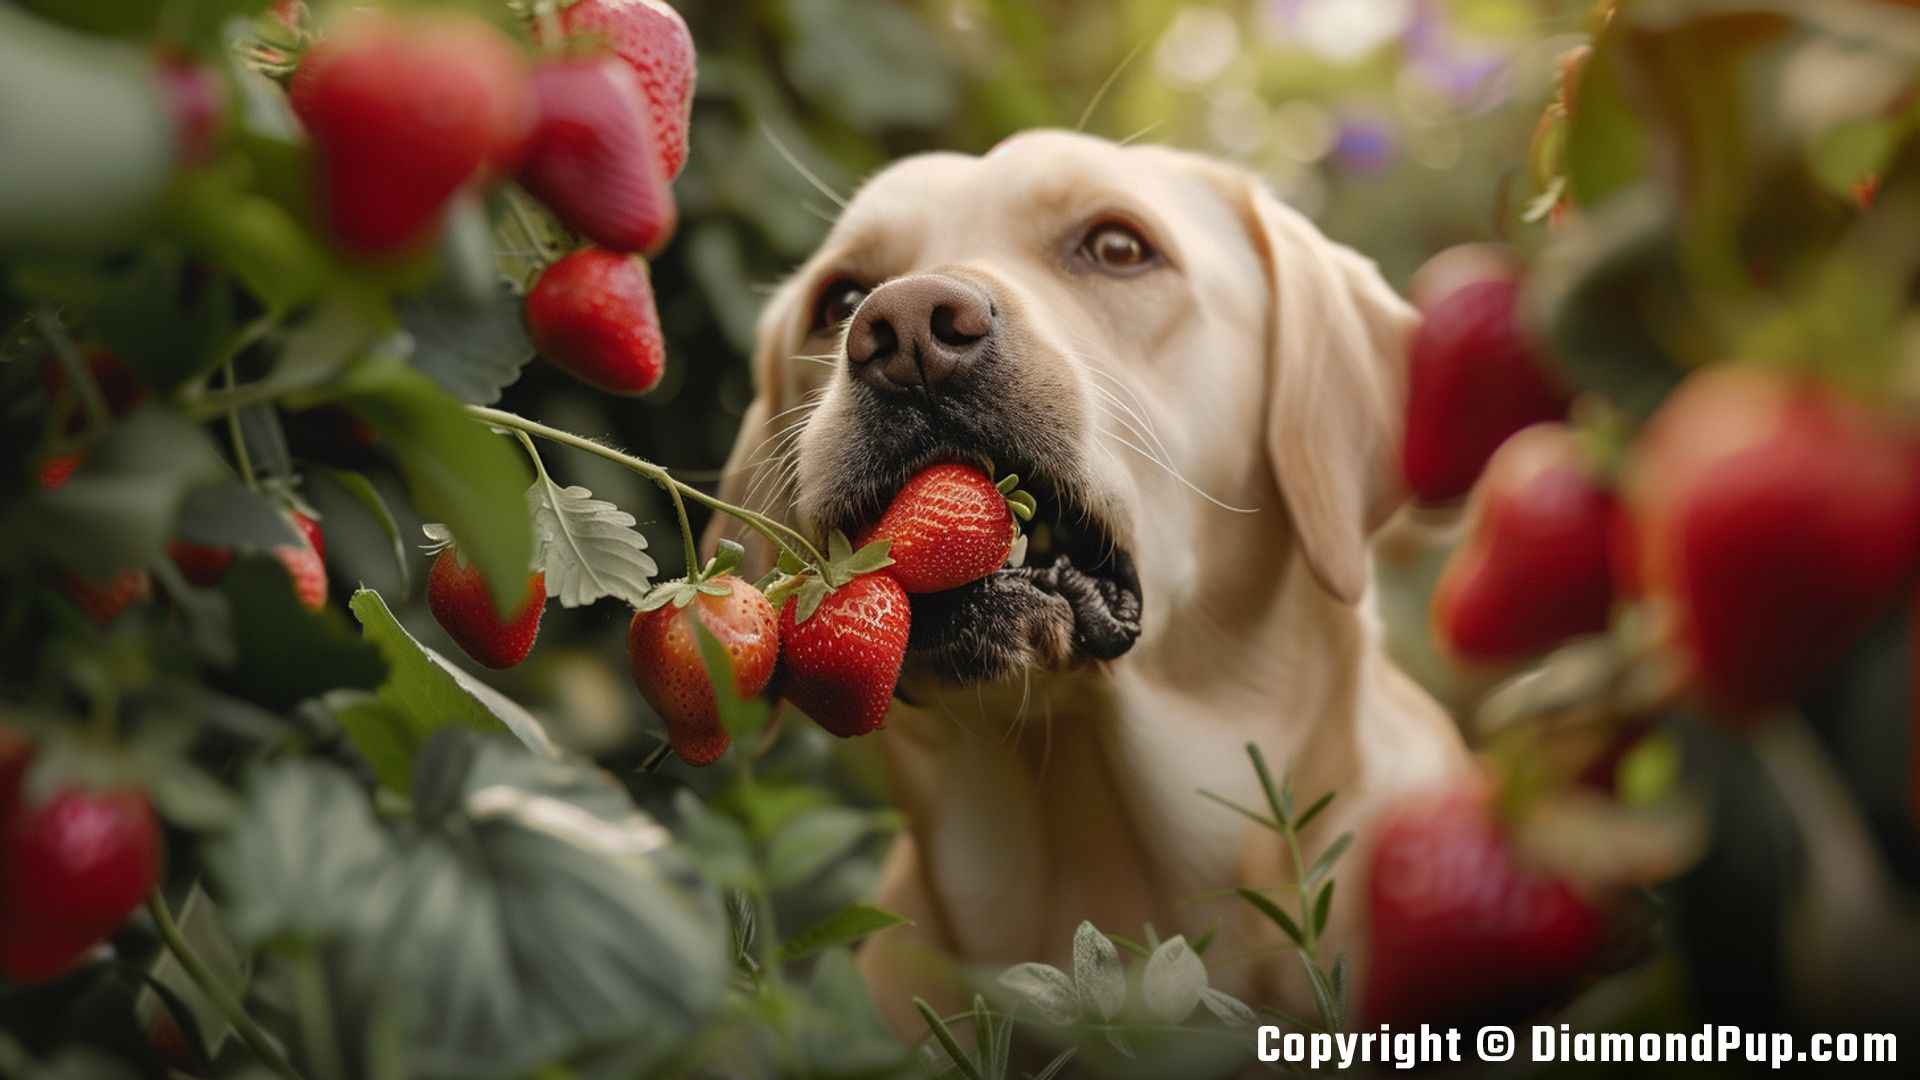 Photograph of a Happy Labrador Snacking on Strawberries